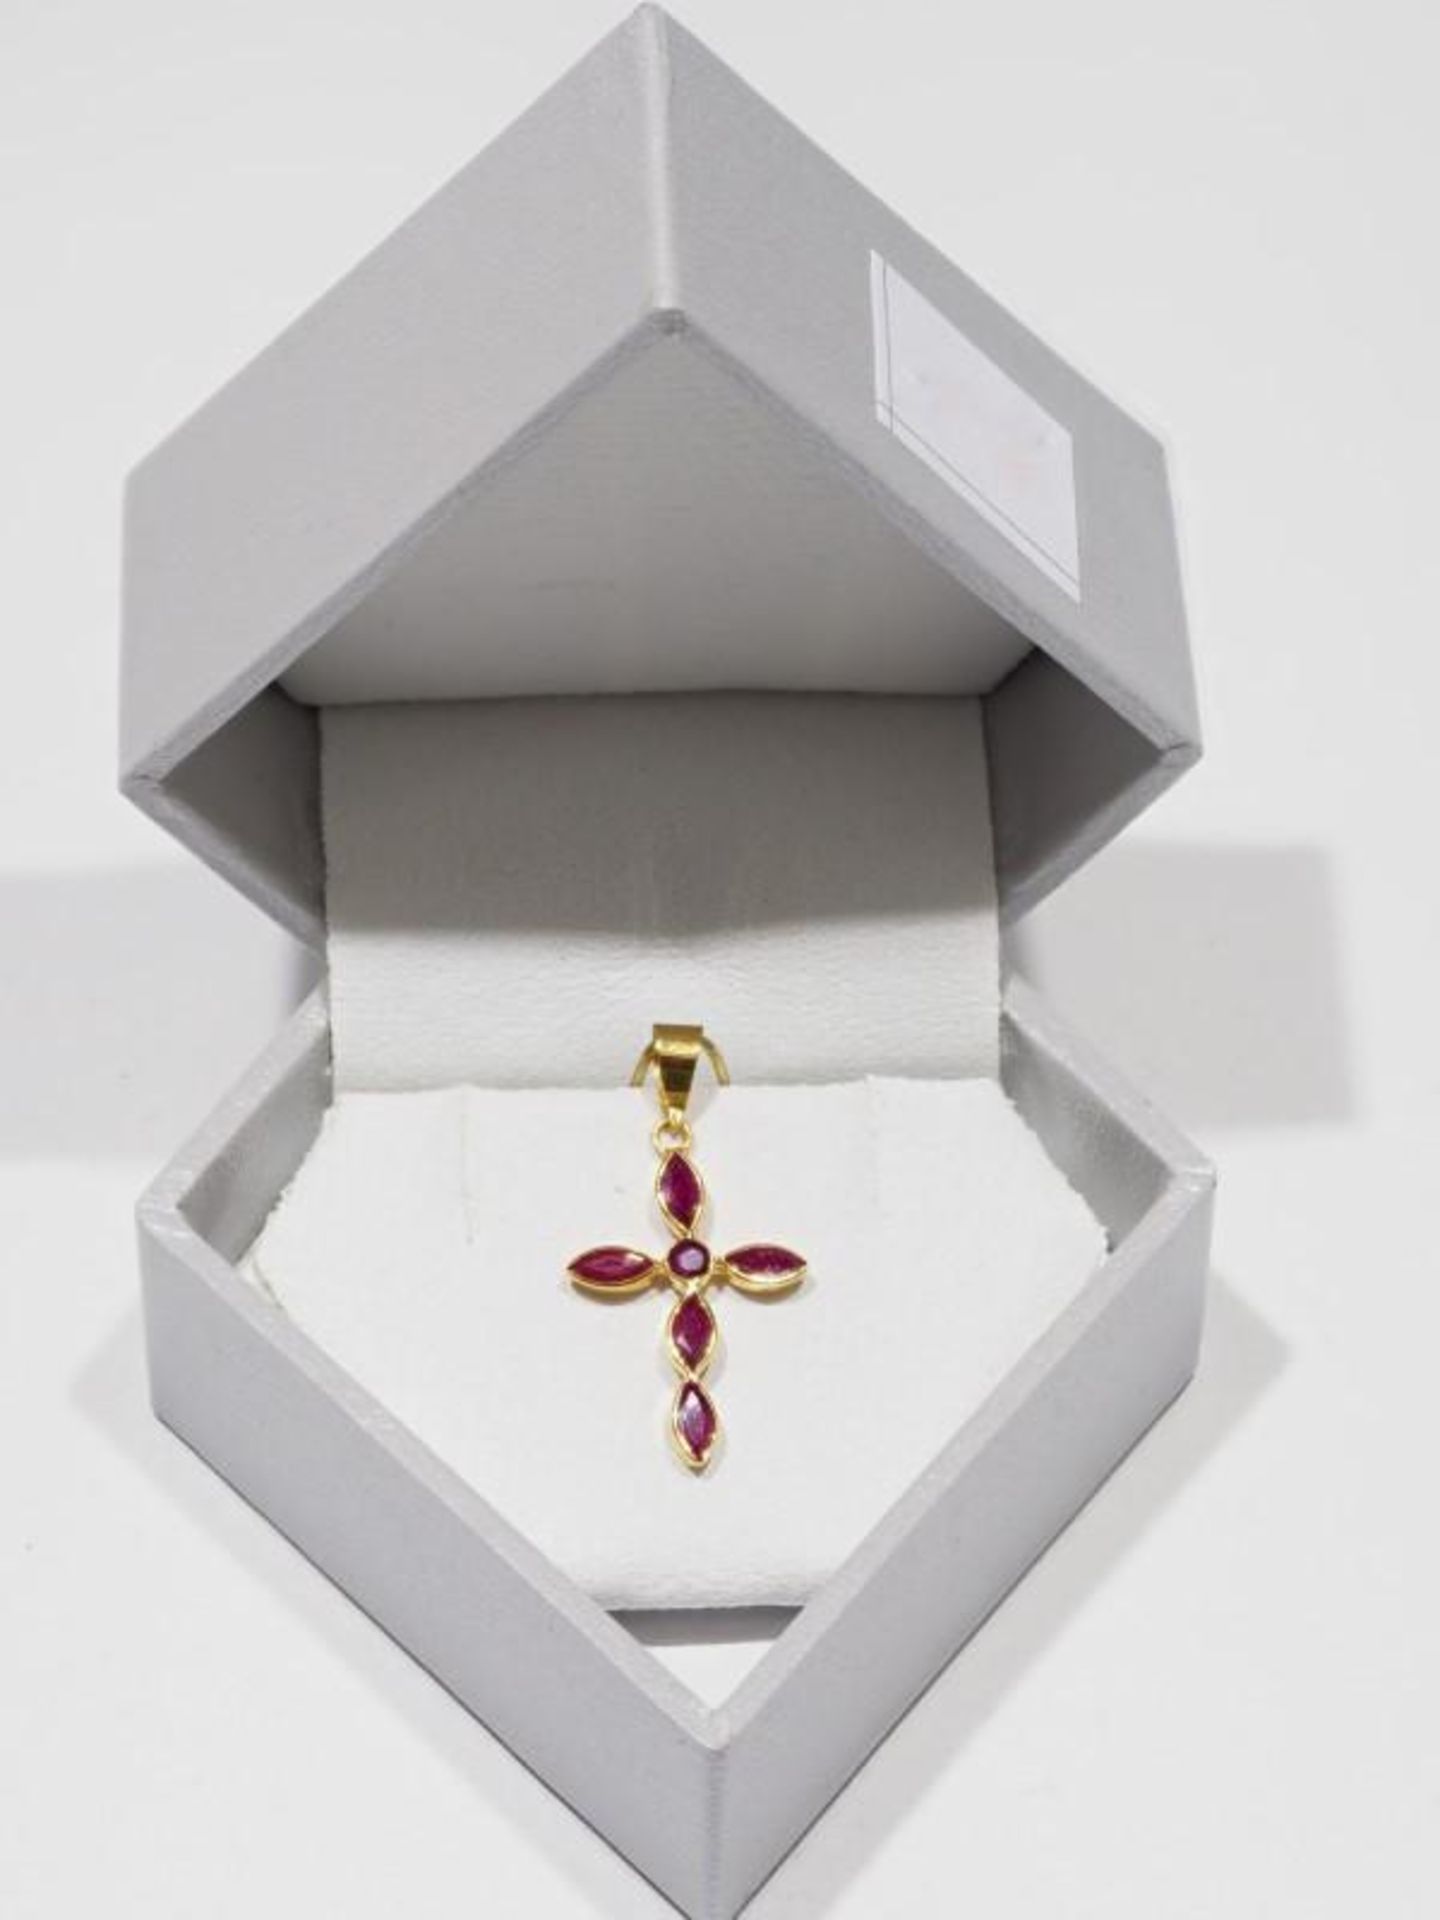 18K Yellow Gold Ruby (0.30ct) Cross Shaped Pendant. Insurance Value $1200 - Image 2 of 3